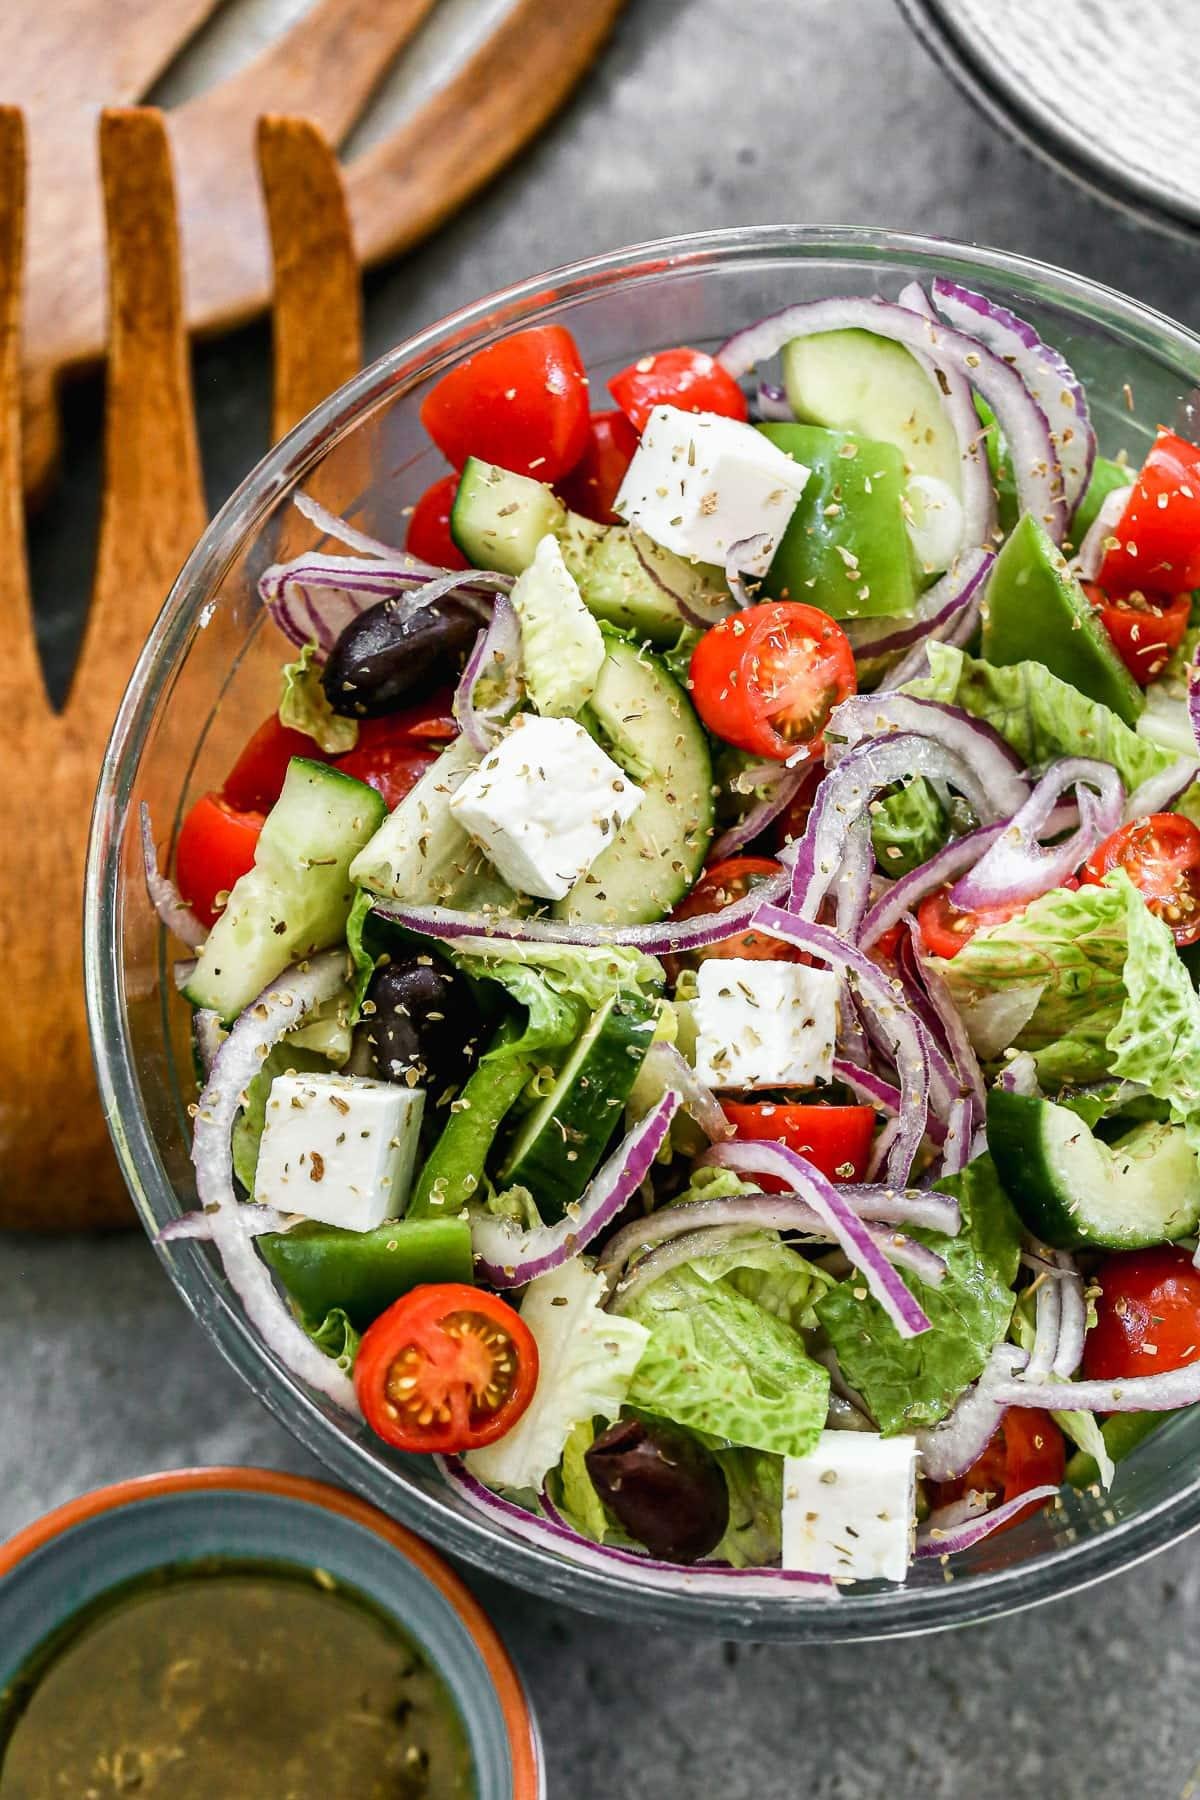 Indulge In The Flavors Of The Mediterranean With This Easy Greek Salad Recipe The Gourmet Cookbook